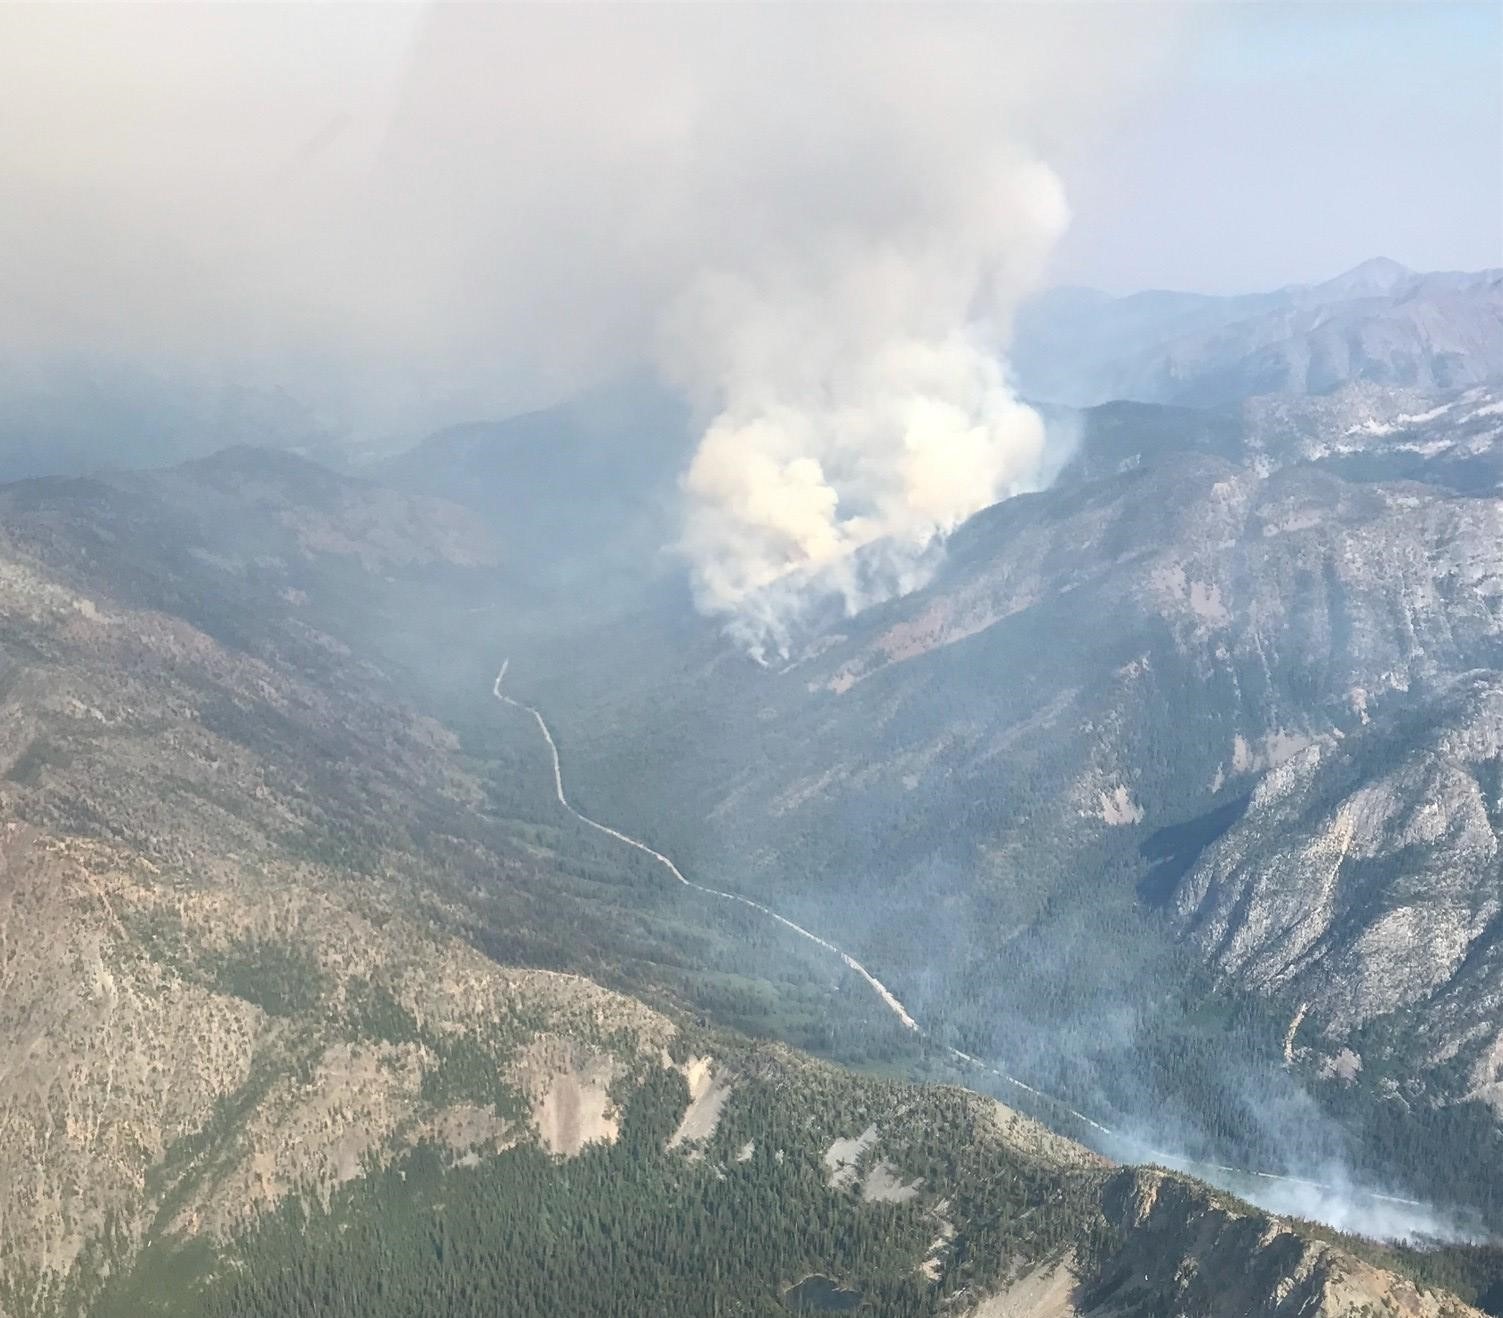 The Varden Fire burning July 11, 2021 near Mazama and the North Cascades Highway has prompted evacuations of campgrounds and put the town of Mazama on alert for possible evacuation. CREDIT: USFS/Inciweb